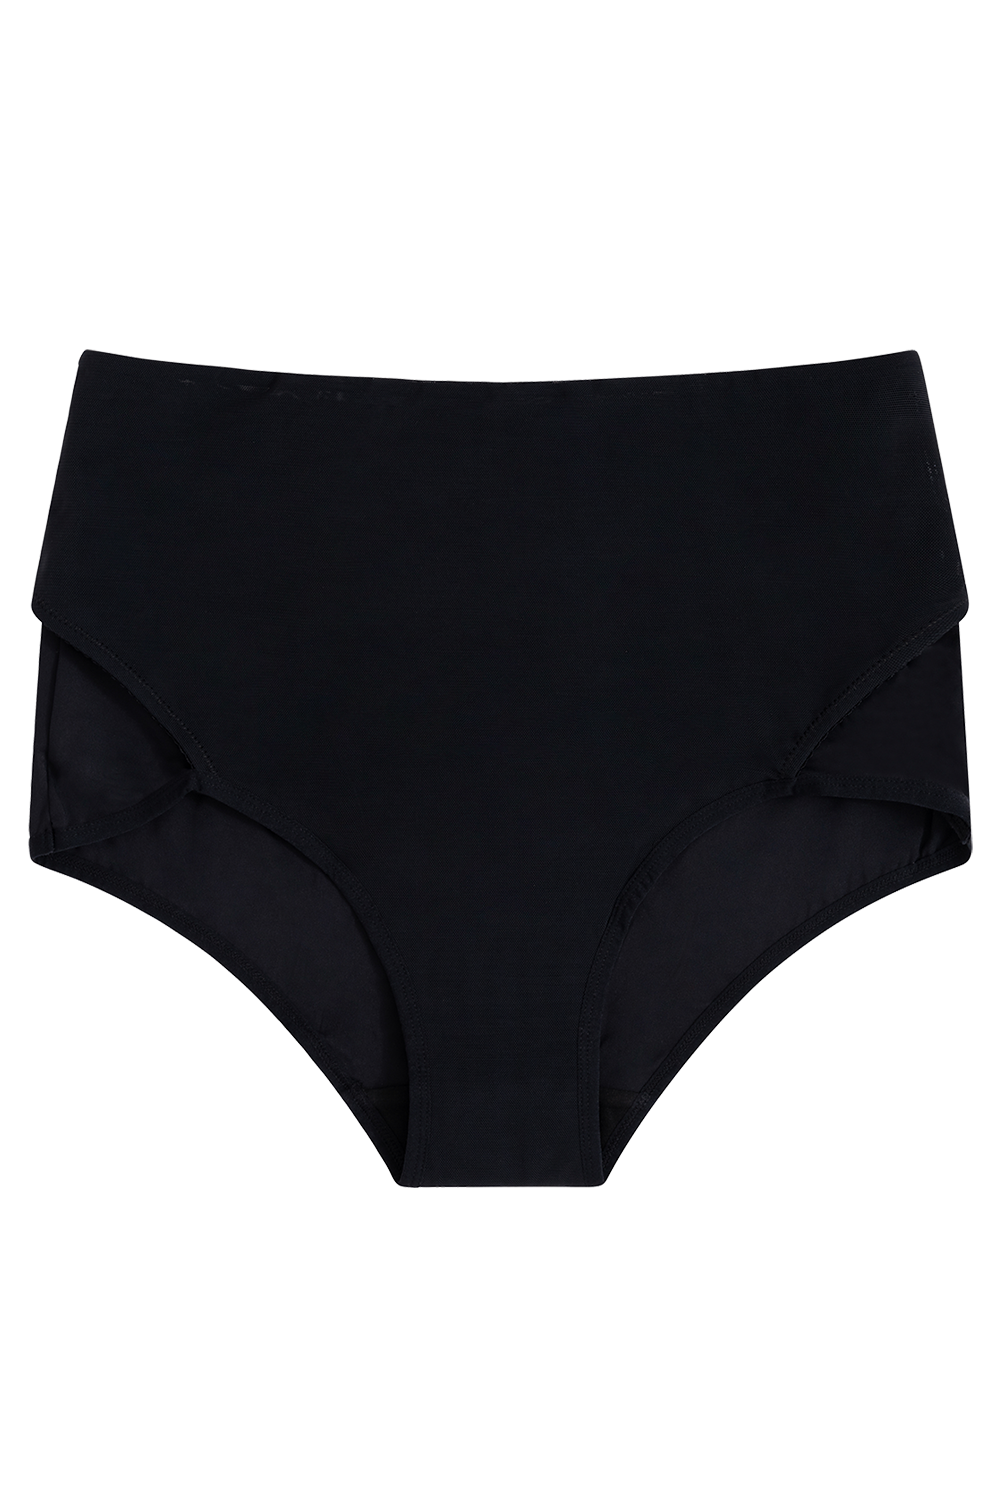 https://rosematernityco.com/cdn/shop/products/RMC-RoseRelief-Underwear-7_1800x1800.png?v=1679630236